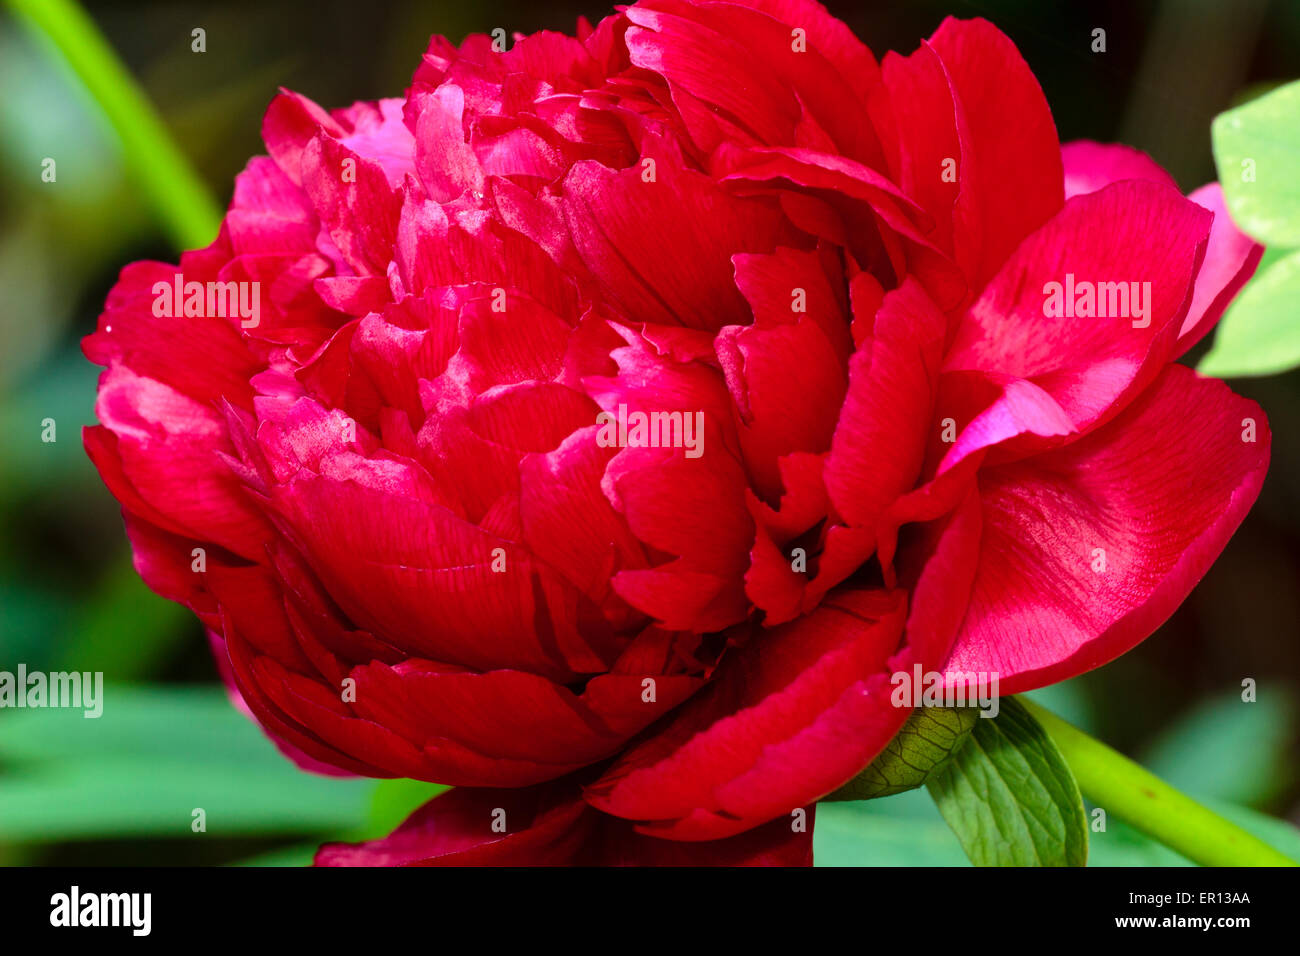 Close up view of the double red flower of the cottage garden peony, Paeonia officinalis 'Rubra Plena' Stock Photo